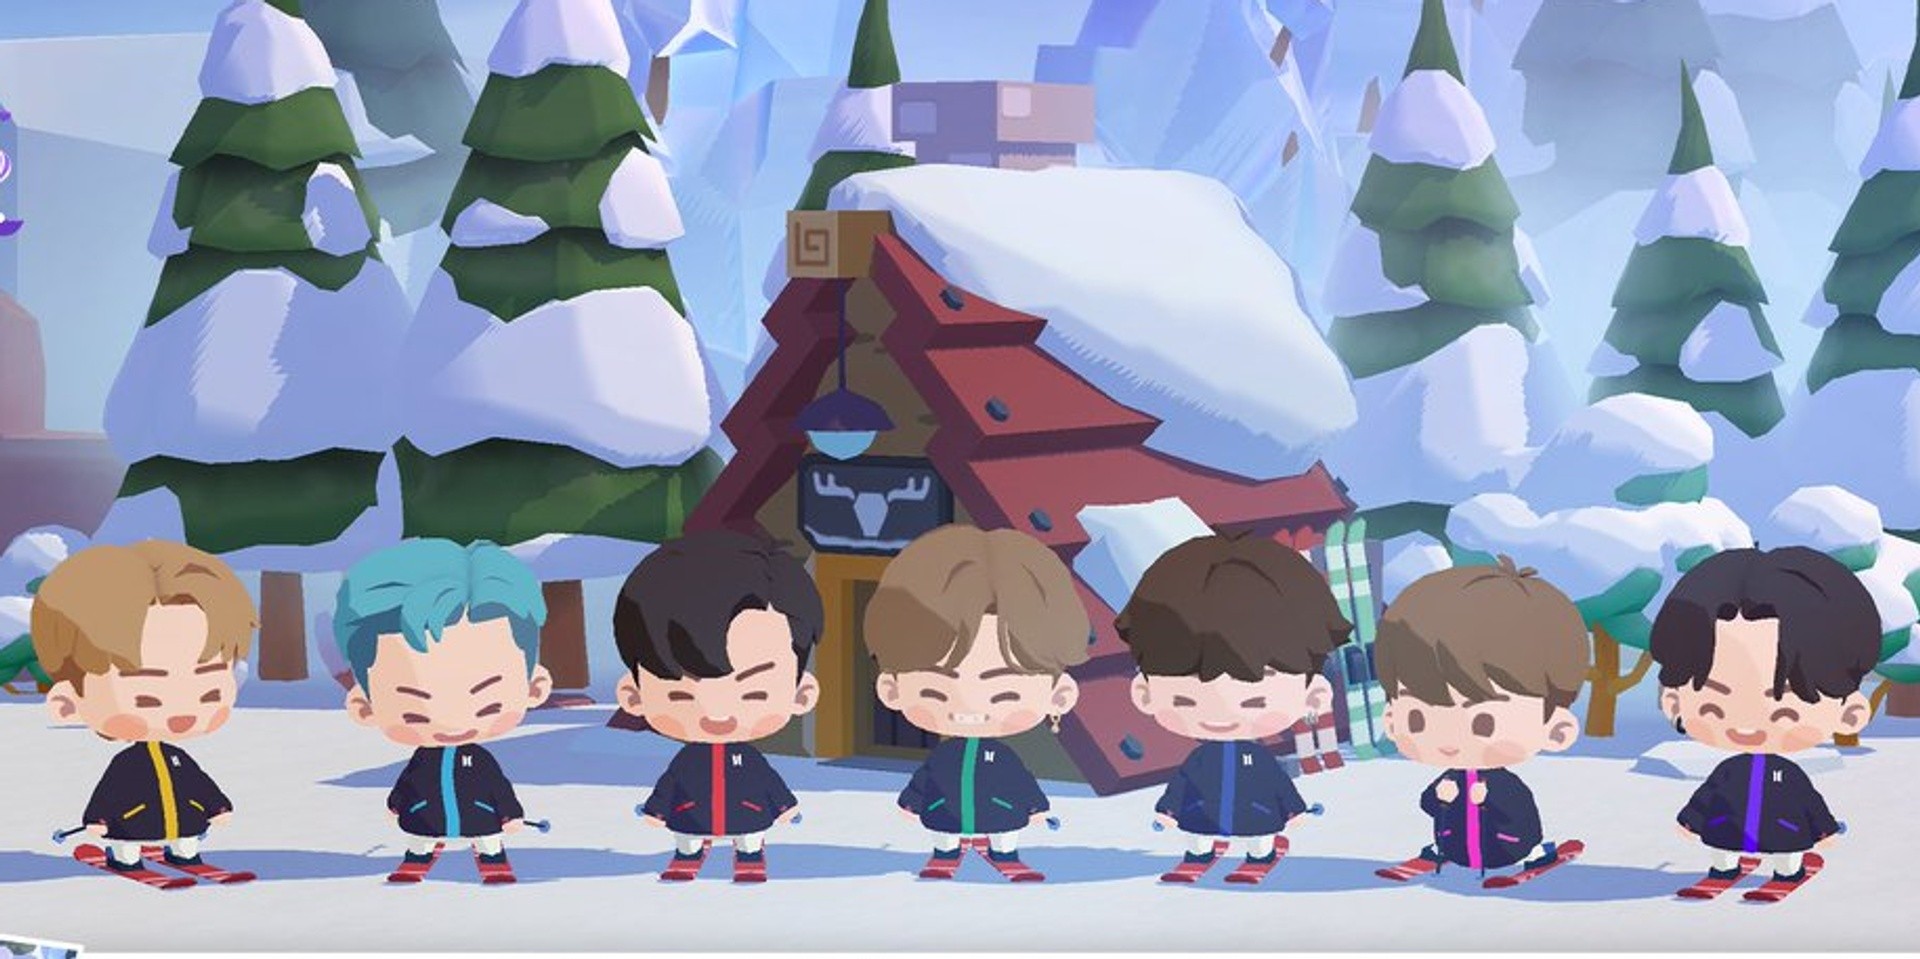 BTS Island: IN THE SEOM unveils new "Winter Island" chapter, challenges, puzzles, and more